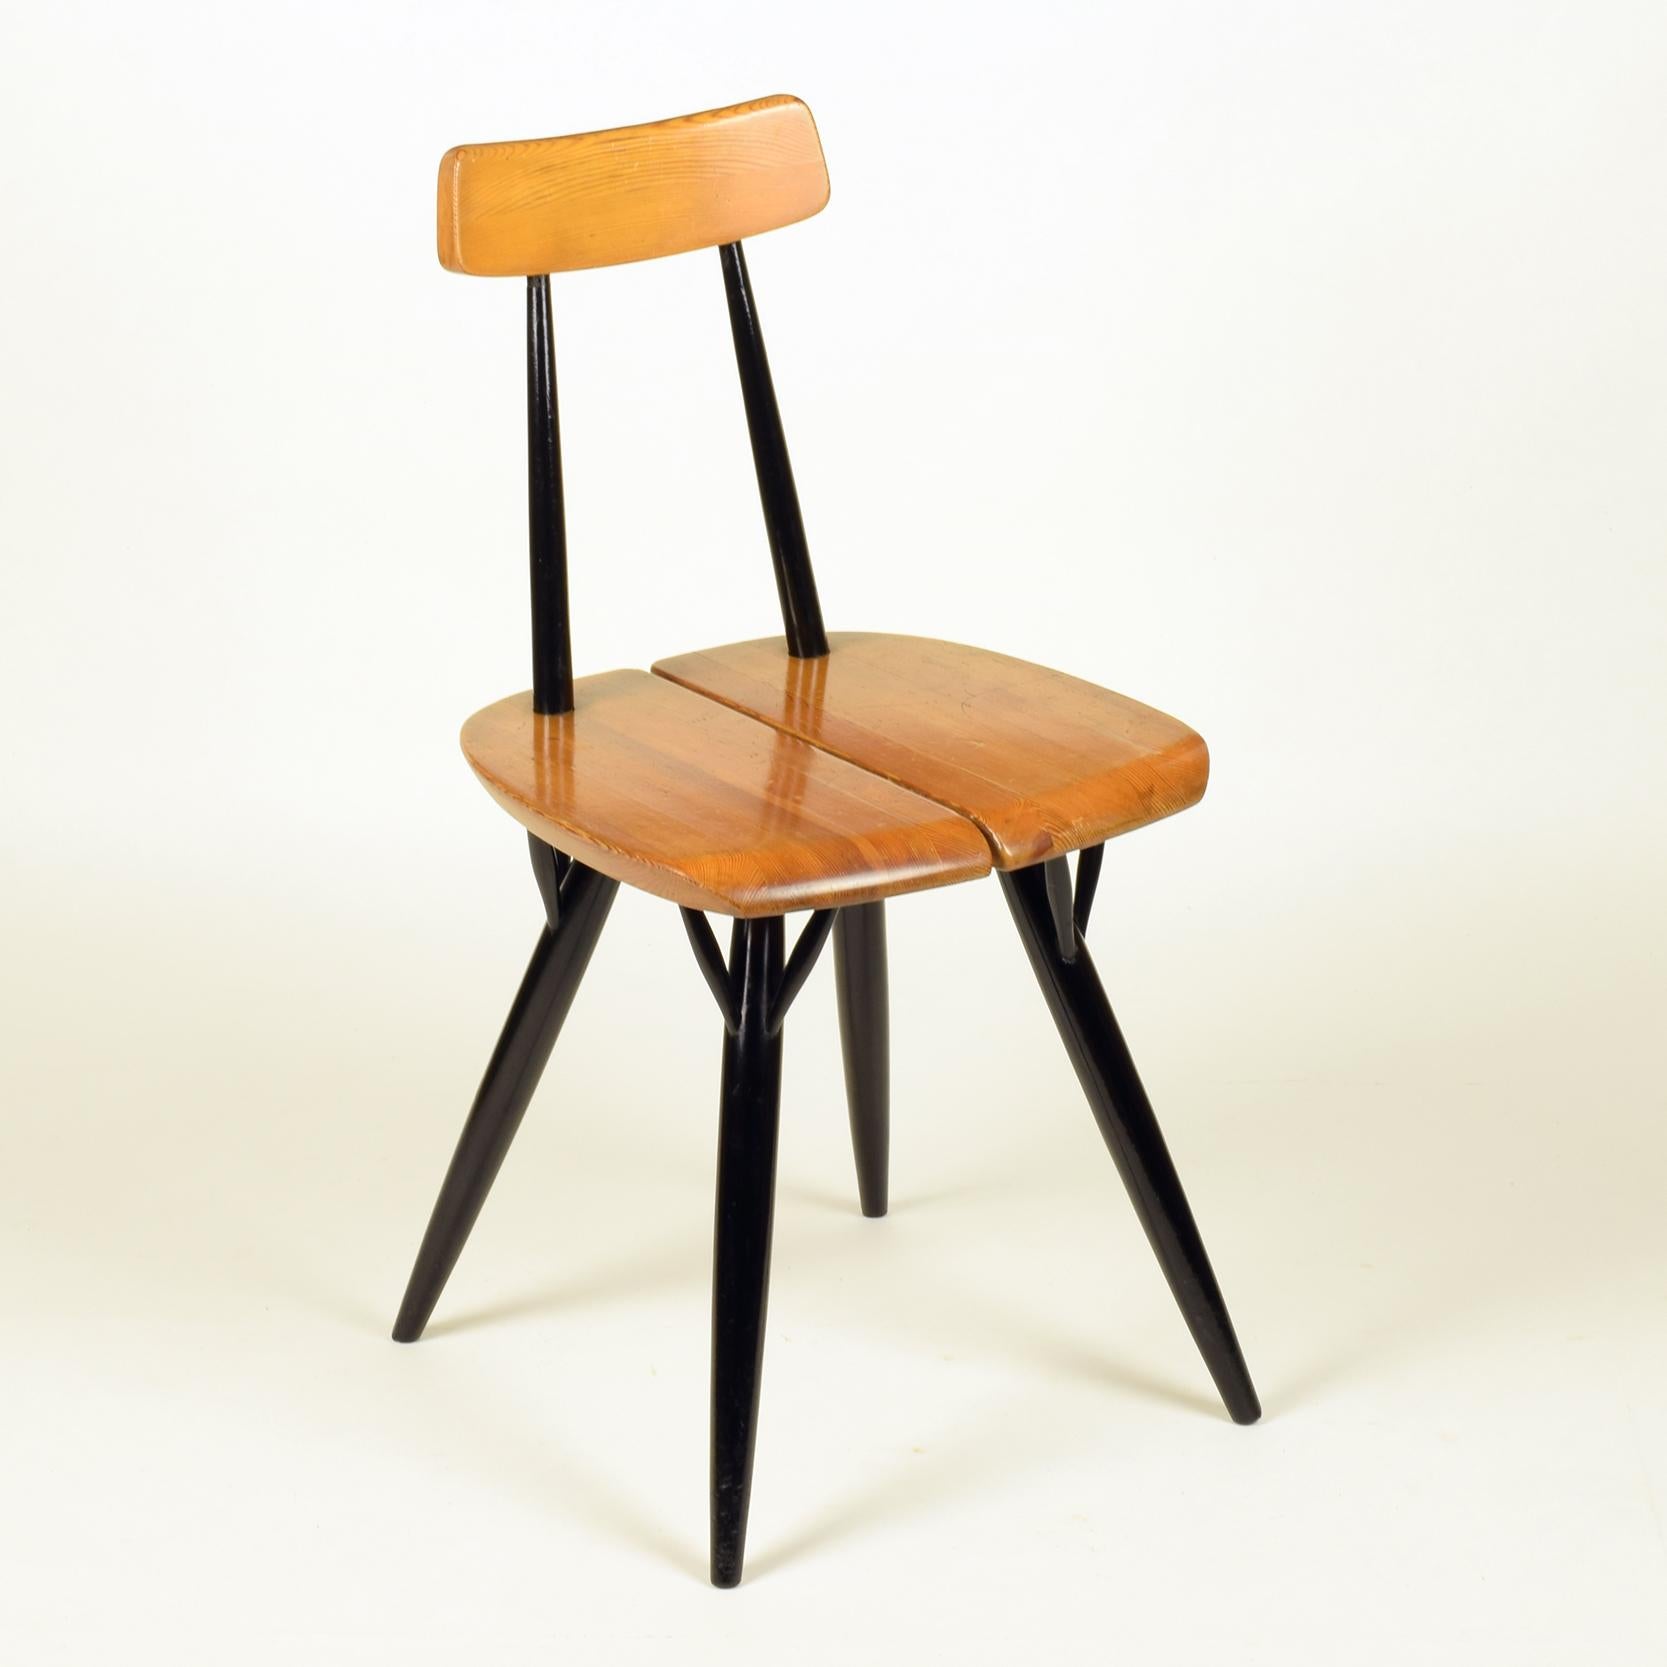 Ilmari Tapiovaara

Laukaan Puu (manufacturer), Finland

'Pirkka' side chair, 1955

Pinewood and black lacquered.
Logo and Manufacturer's / Designer's details stamped to underside.

A lovely example of this elegant chair, in original and